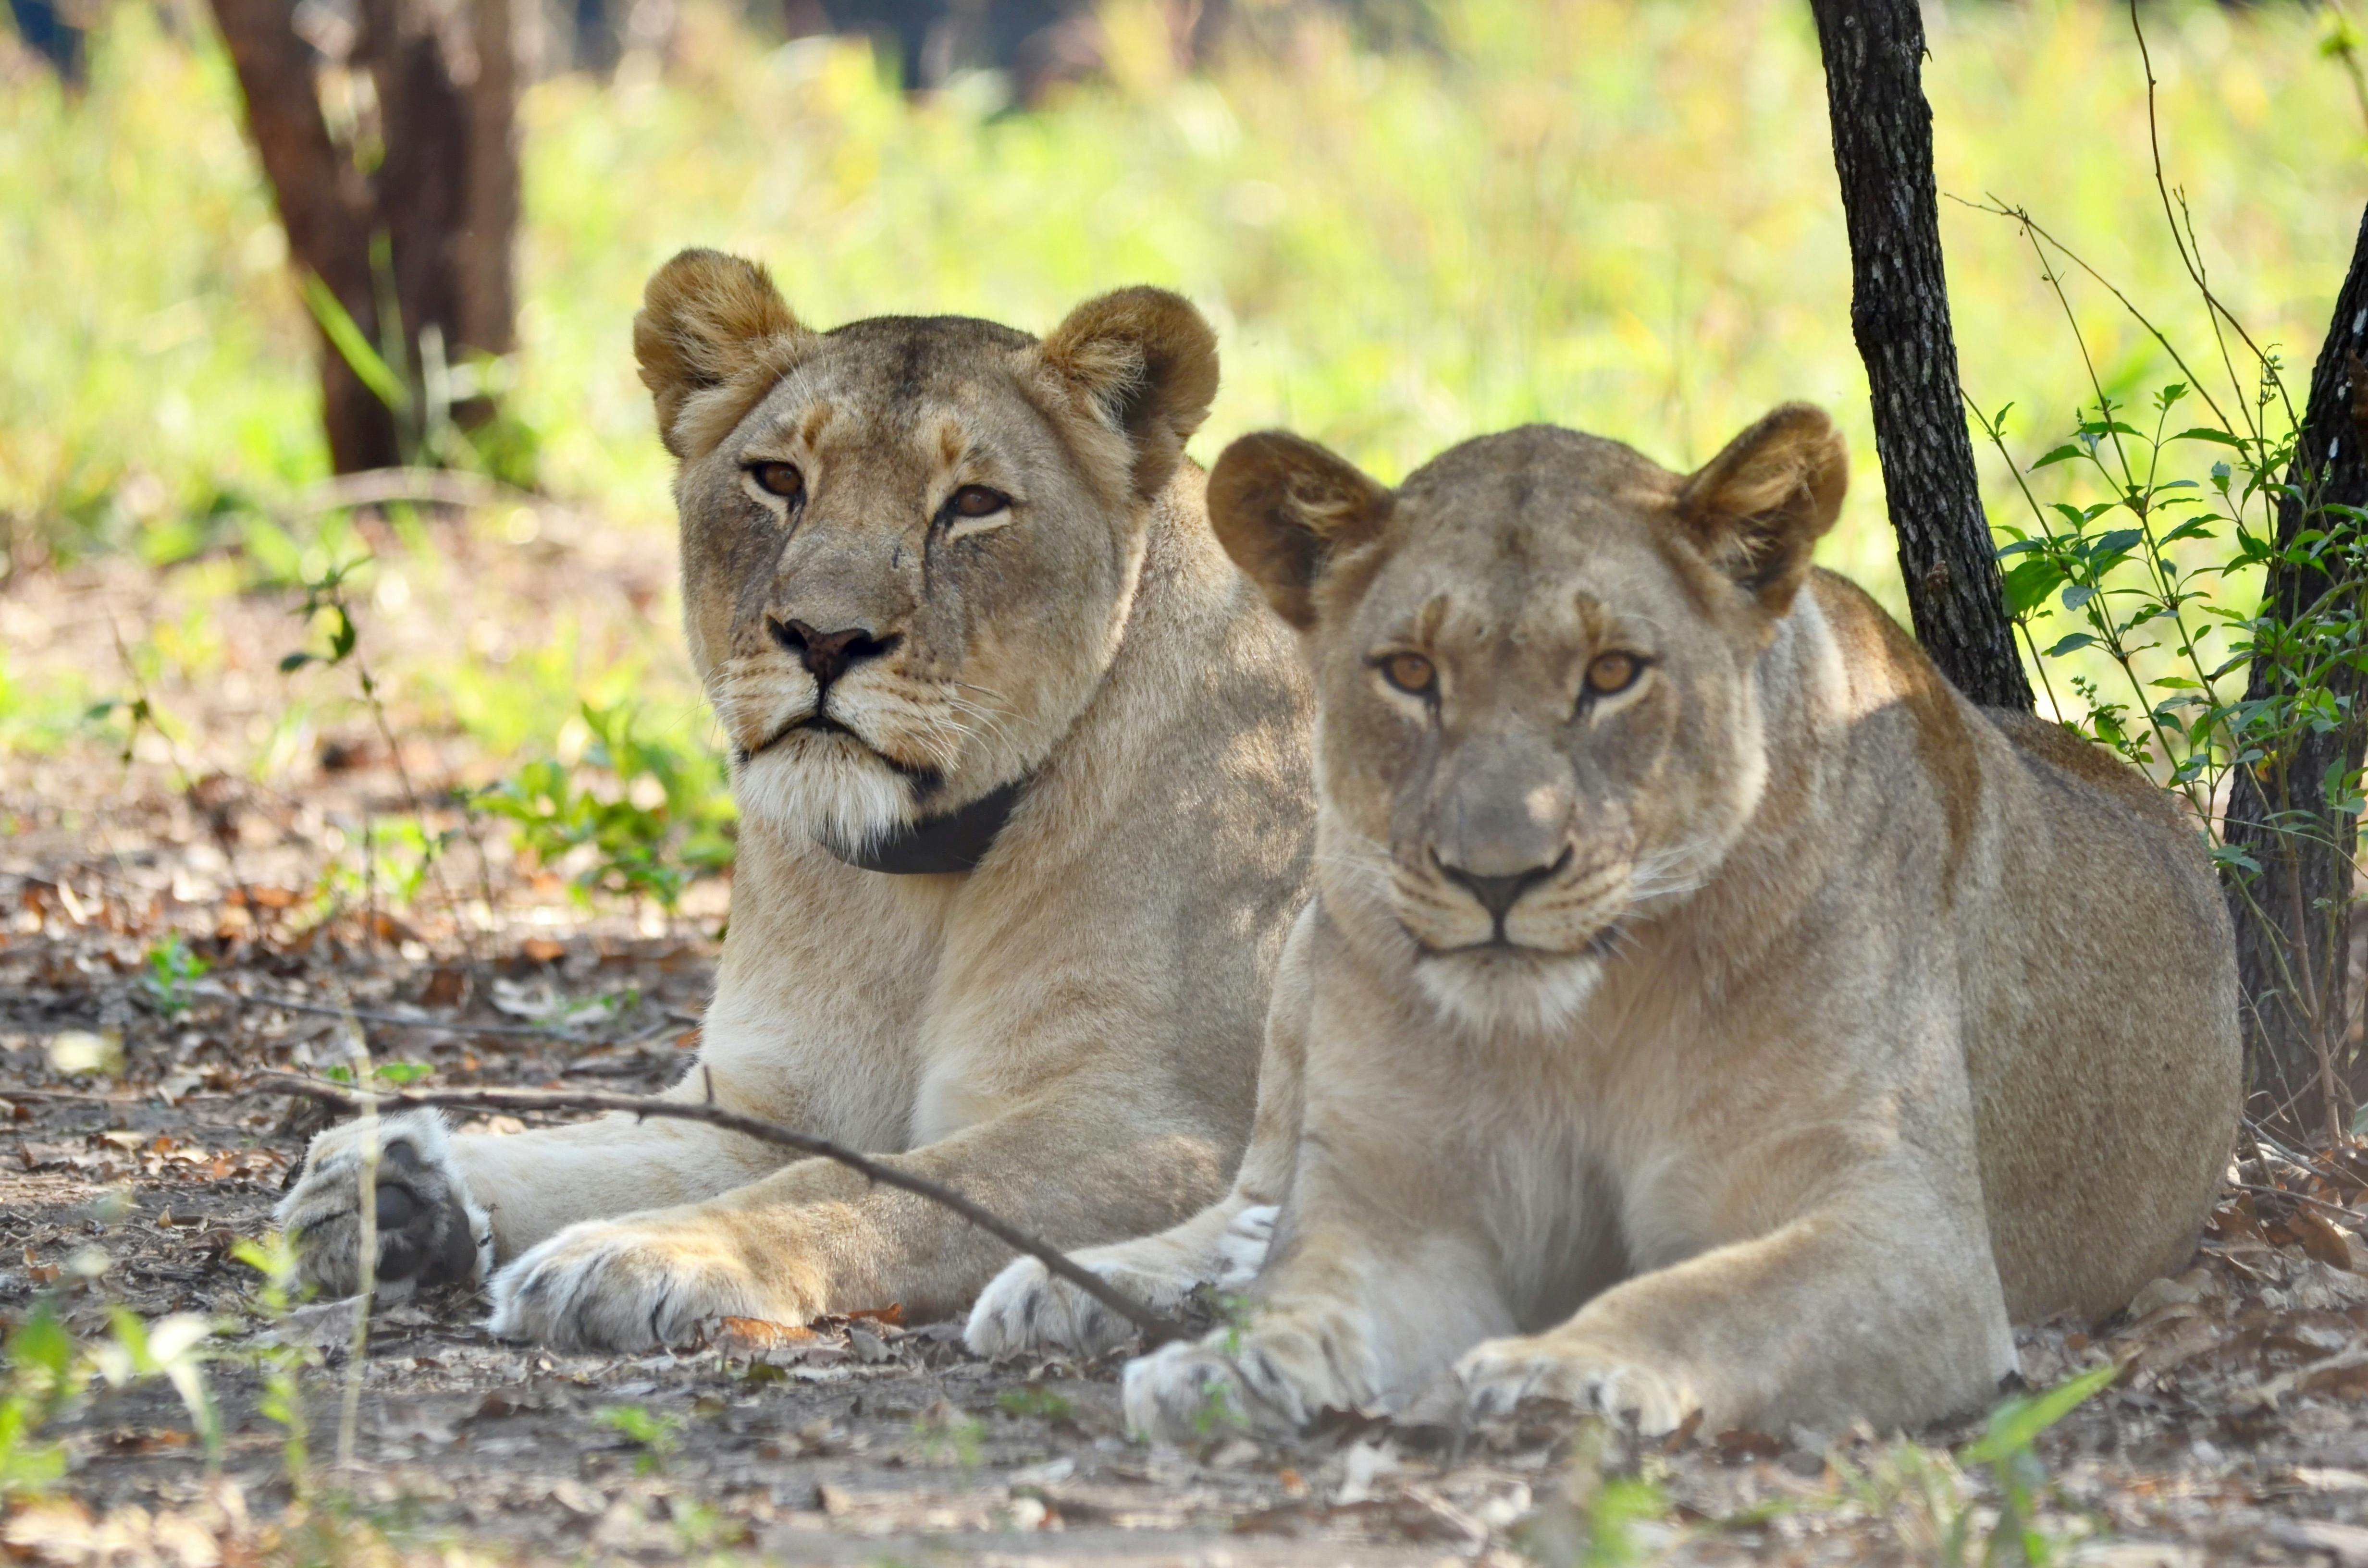 Protecting and growing Malawi’s lion population